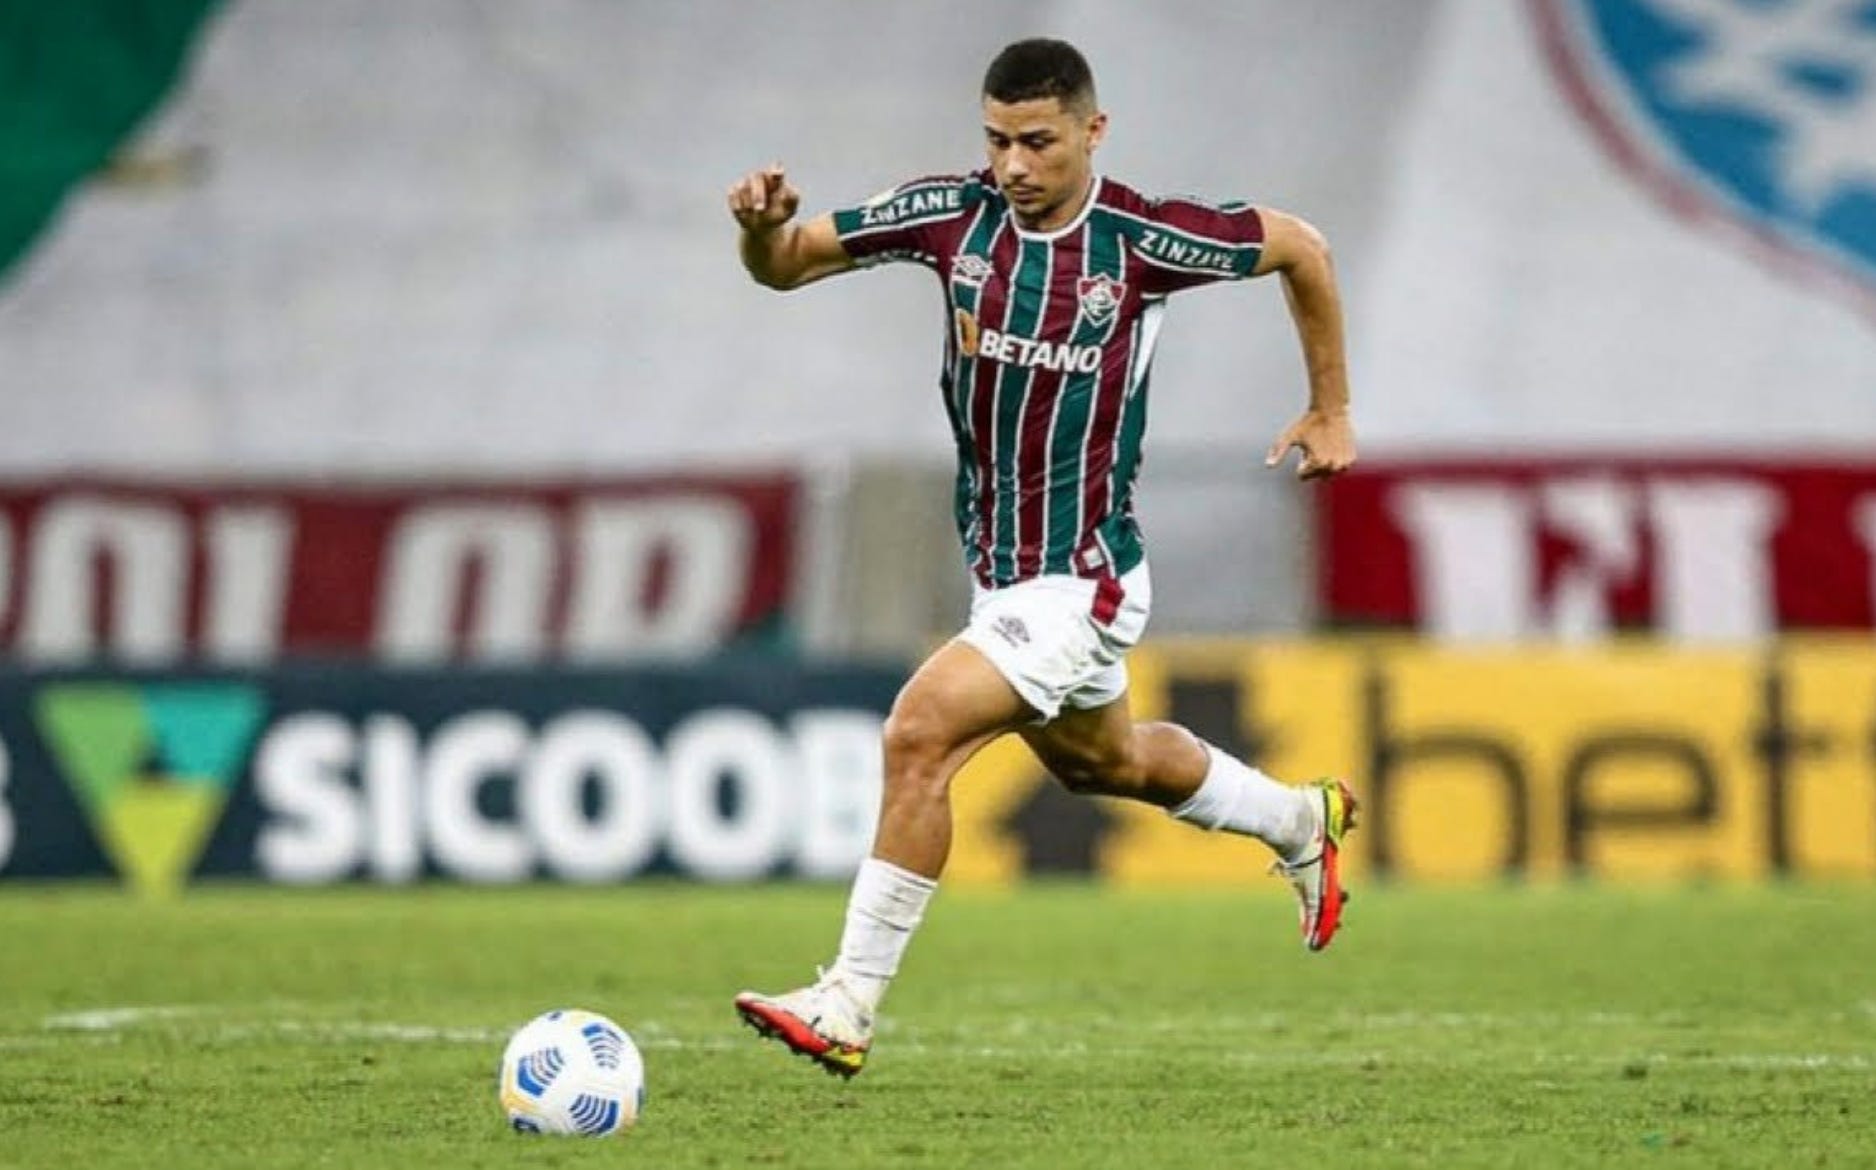 Fulham overtake Liverpool in the race to sign Fluminense midfielder Andre Trindade. 